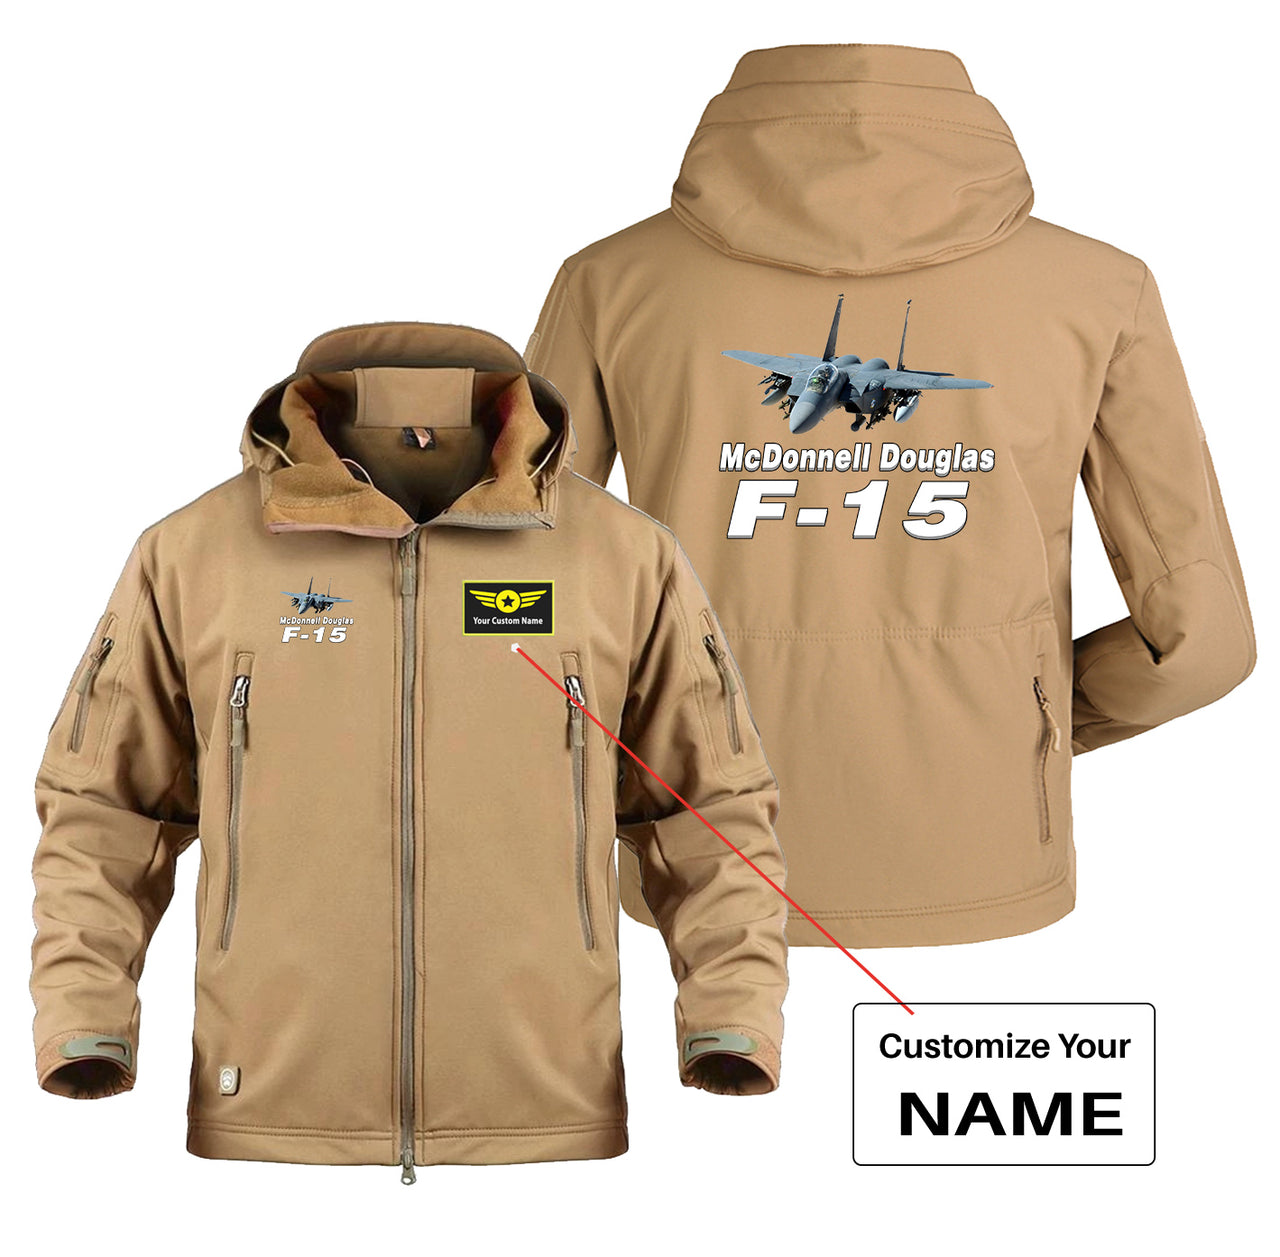 The McDonnell Douglas F15 Designed Military Jackets (Customizable)